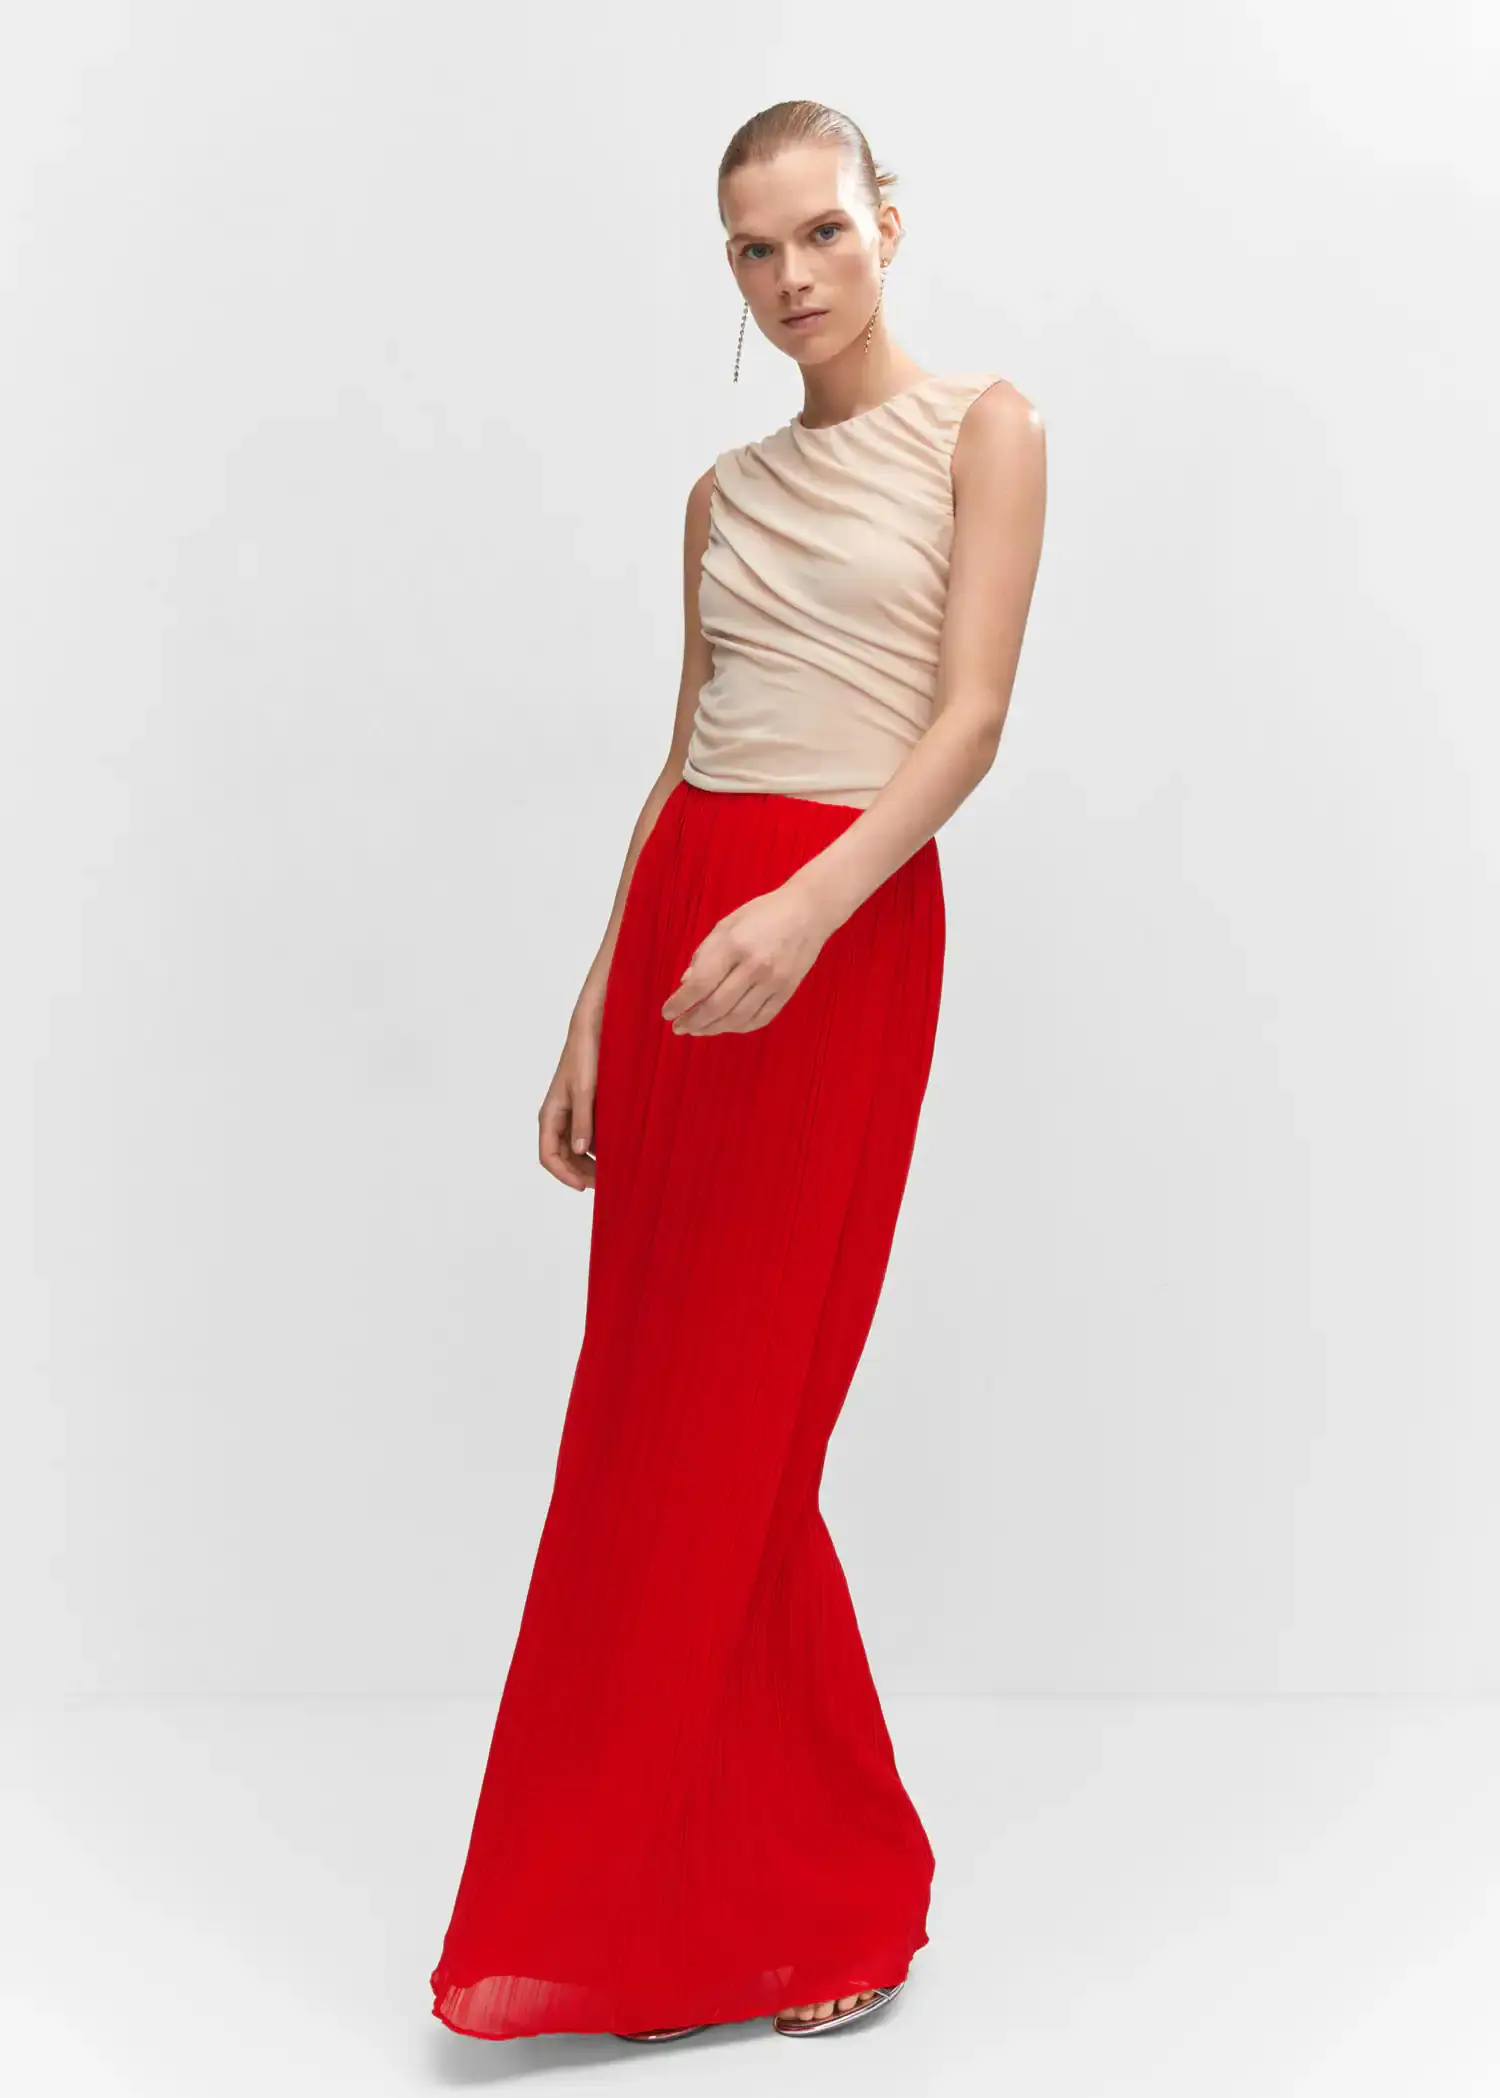 Mango Pleated long skirt. a woman in a red skirt and beige top. 